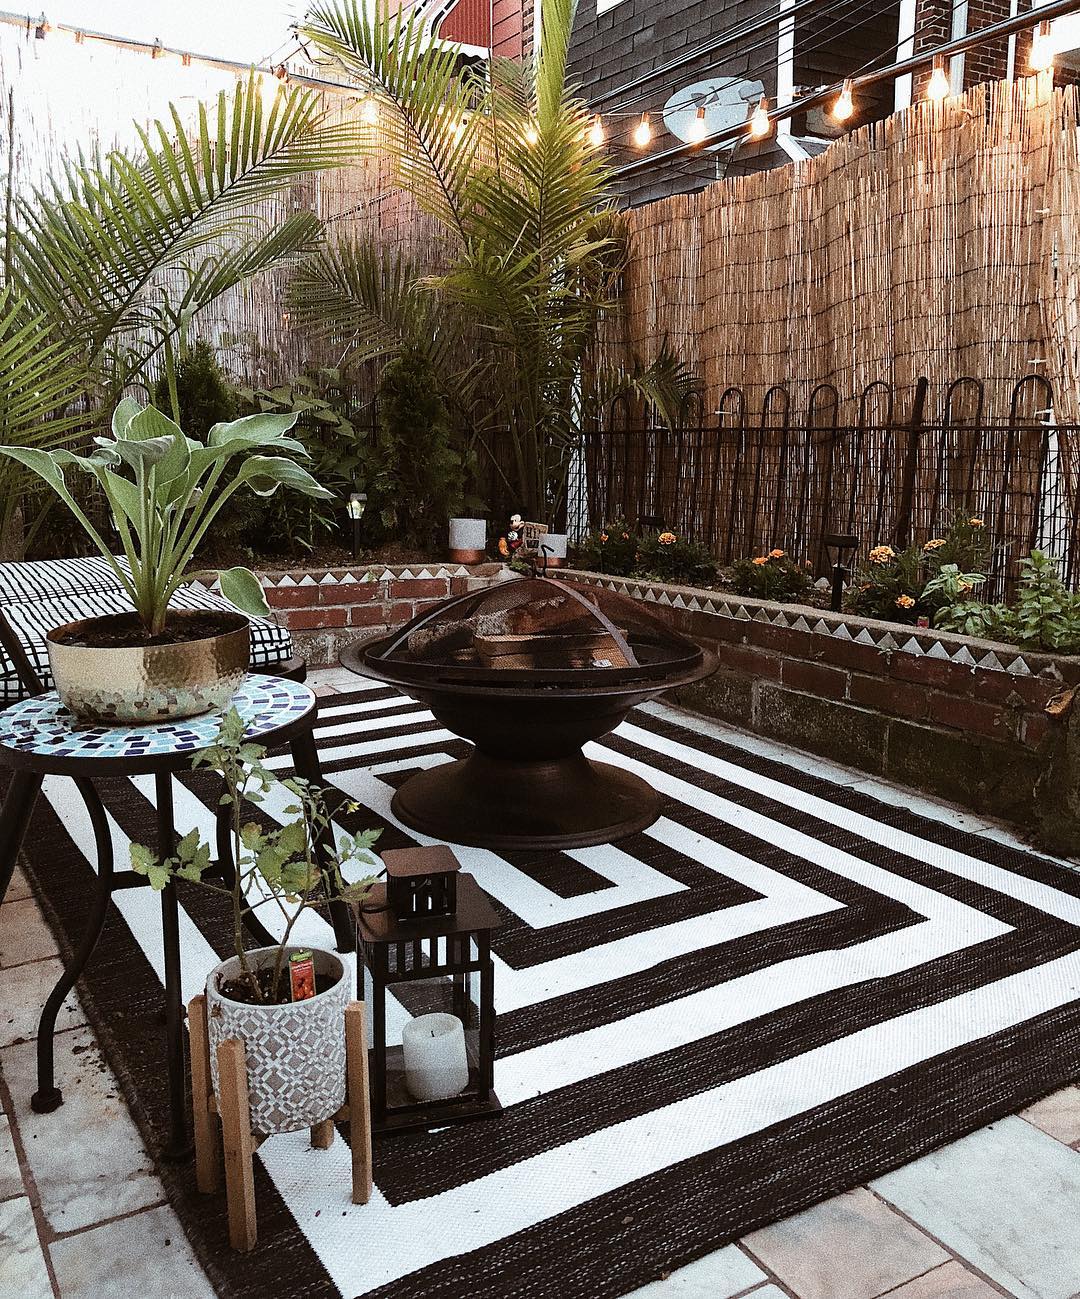 Patio with fire pit and black and white rug. Photo by Instagram user @alexandmike